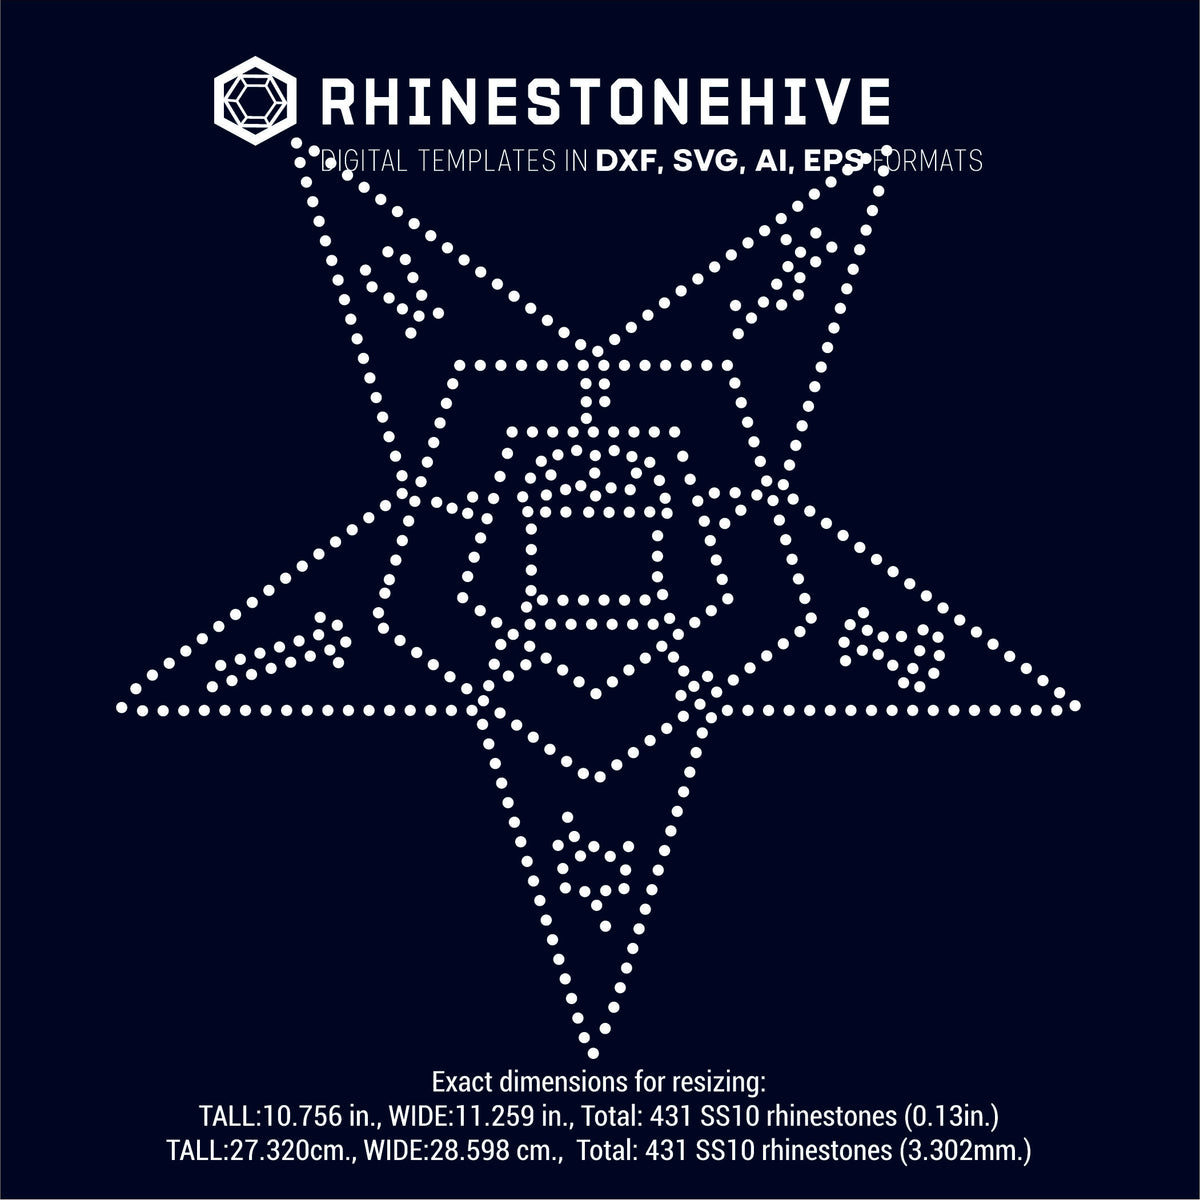 Download Eastern Star rhinestone template, svg, eps, ai, png, dxf - BEEHIVEFILES & RHINESTONEHIVE